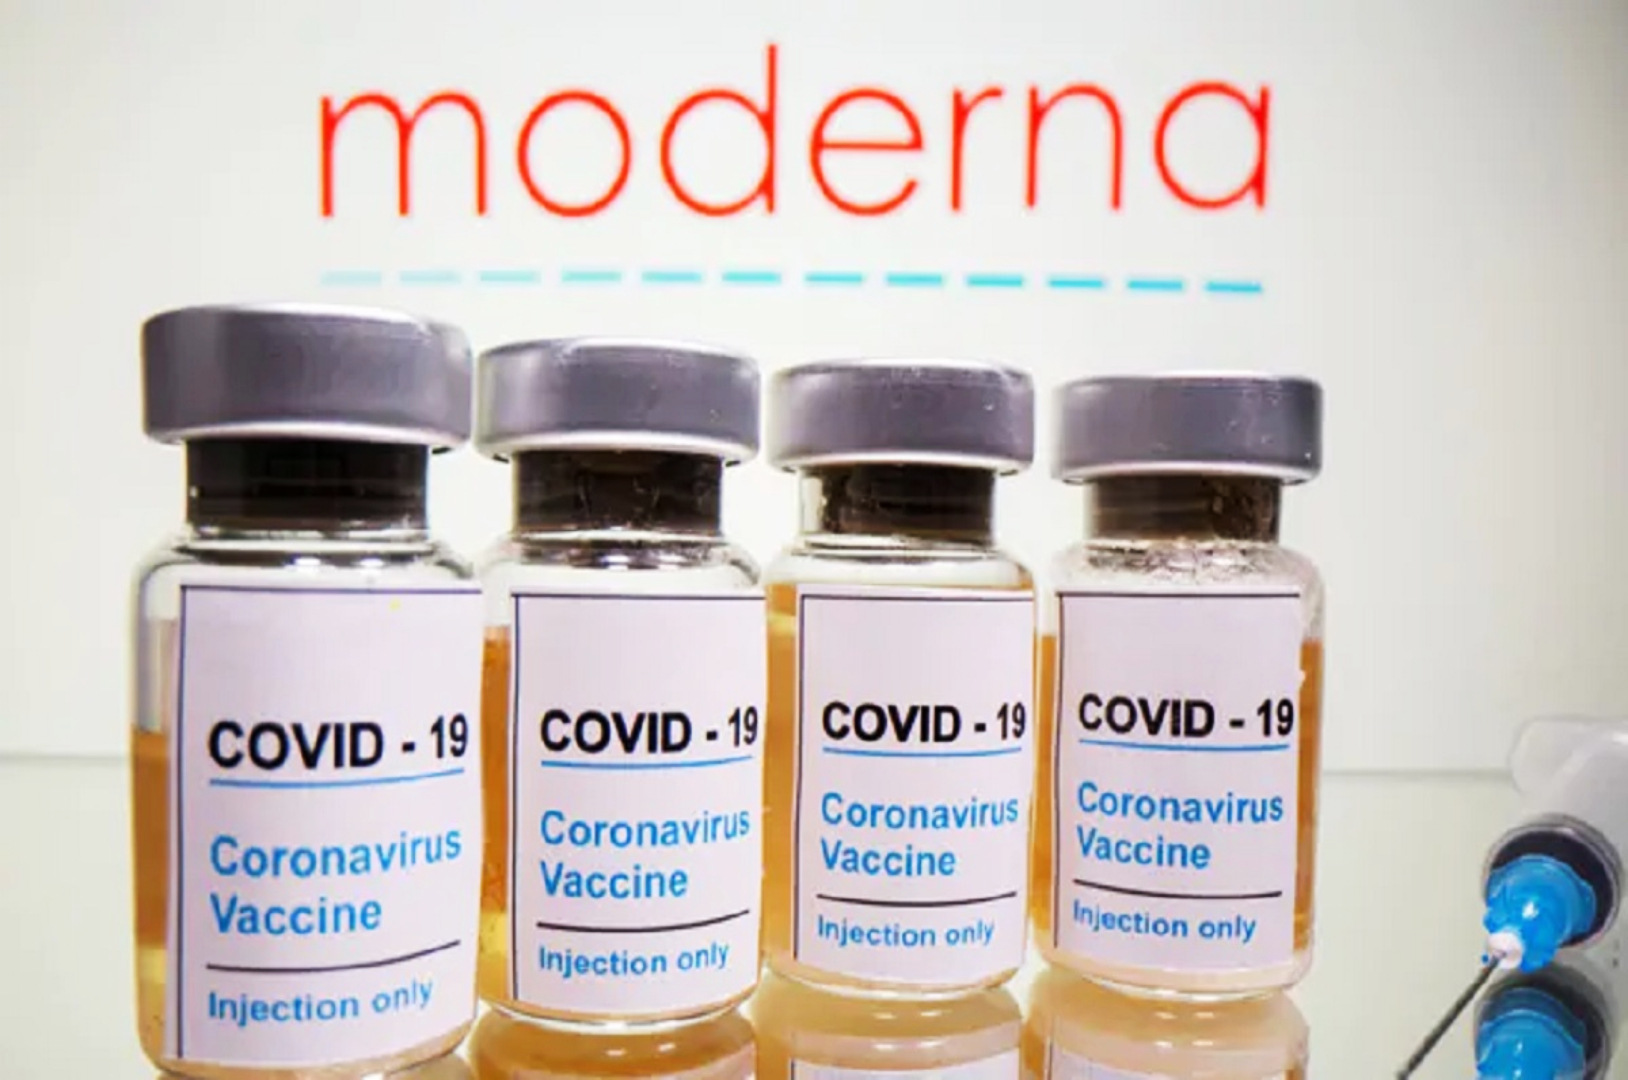 US Doctor Has Severe Allergic Reaction To Moderna Covid Vaccine Report